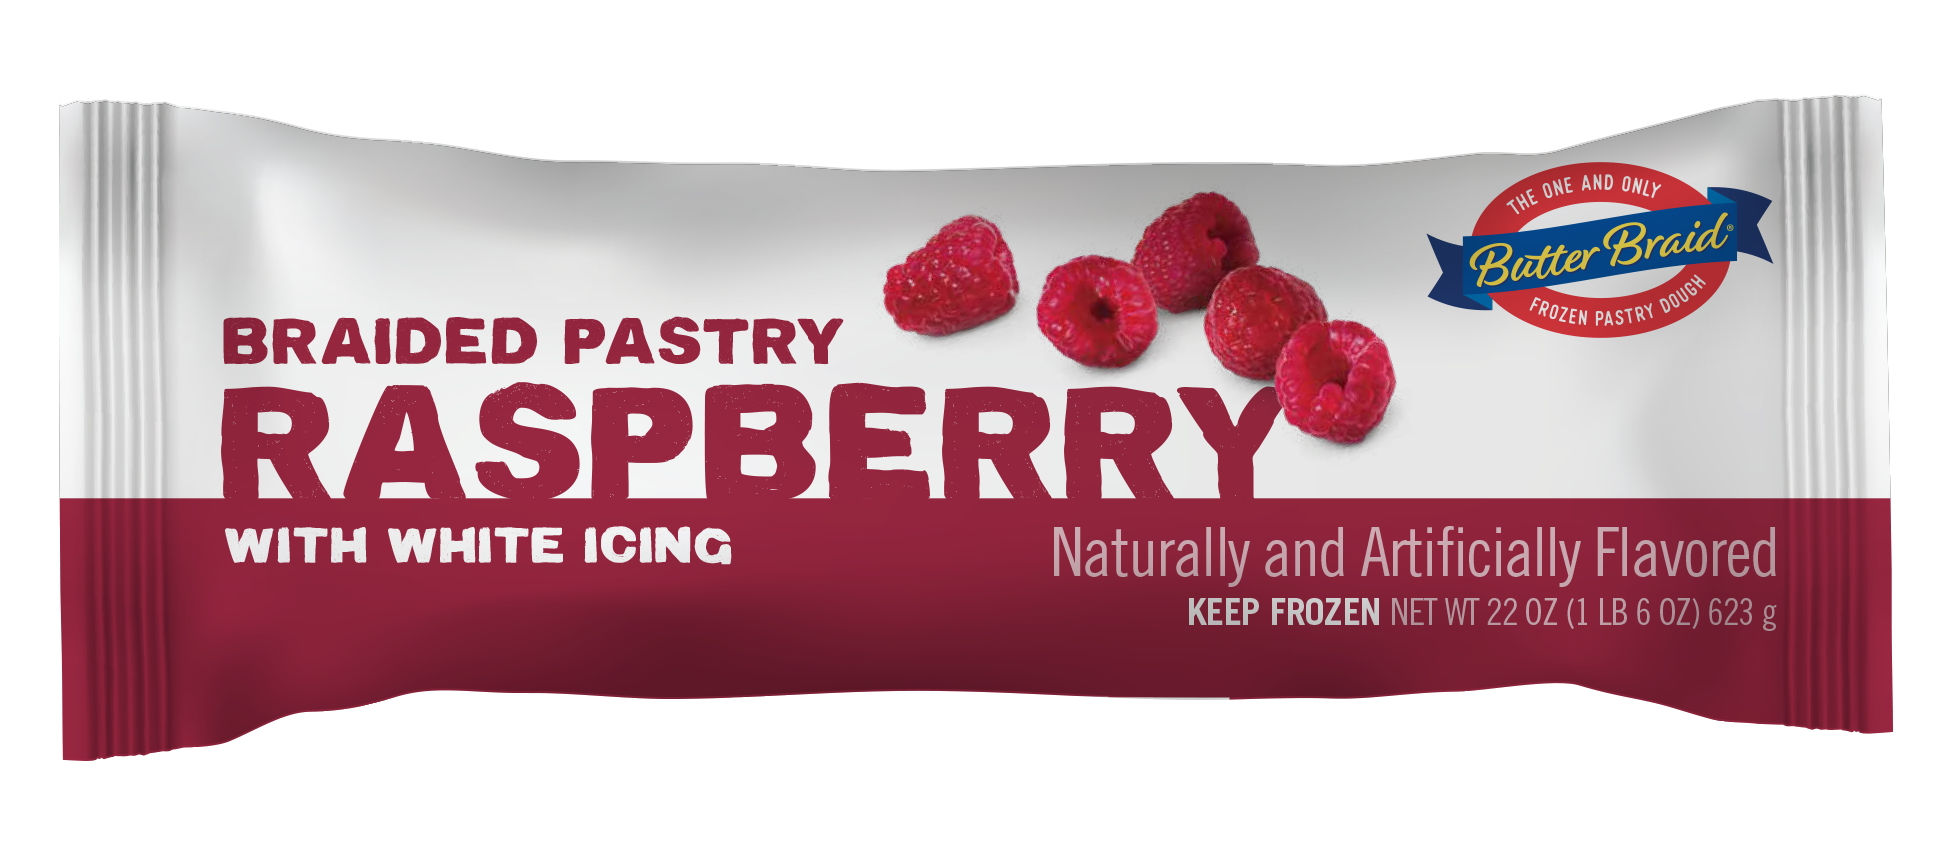 Raspberry Butter Braid® Pastry packaging